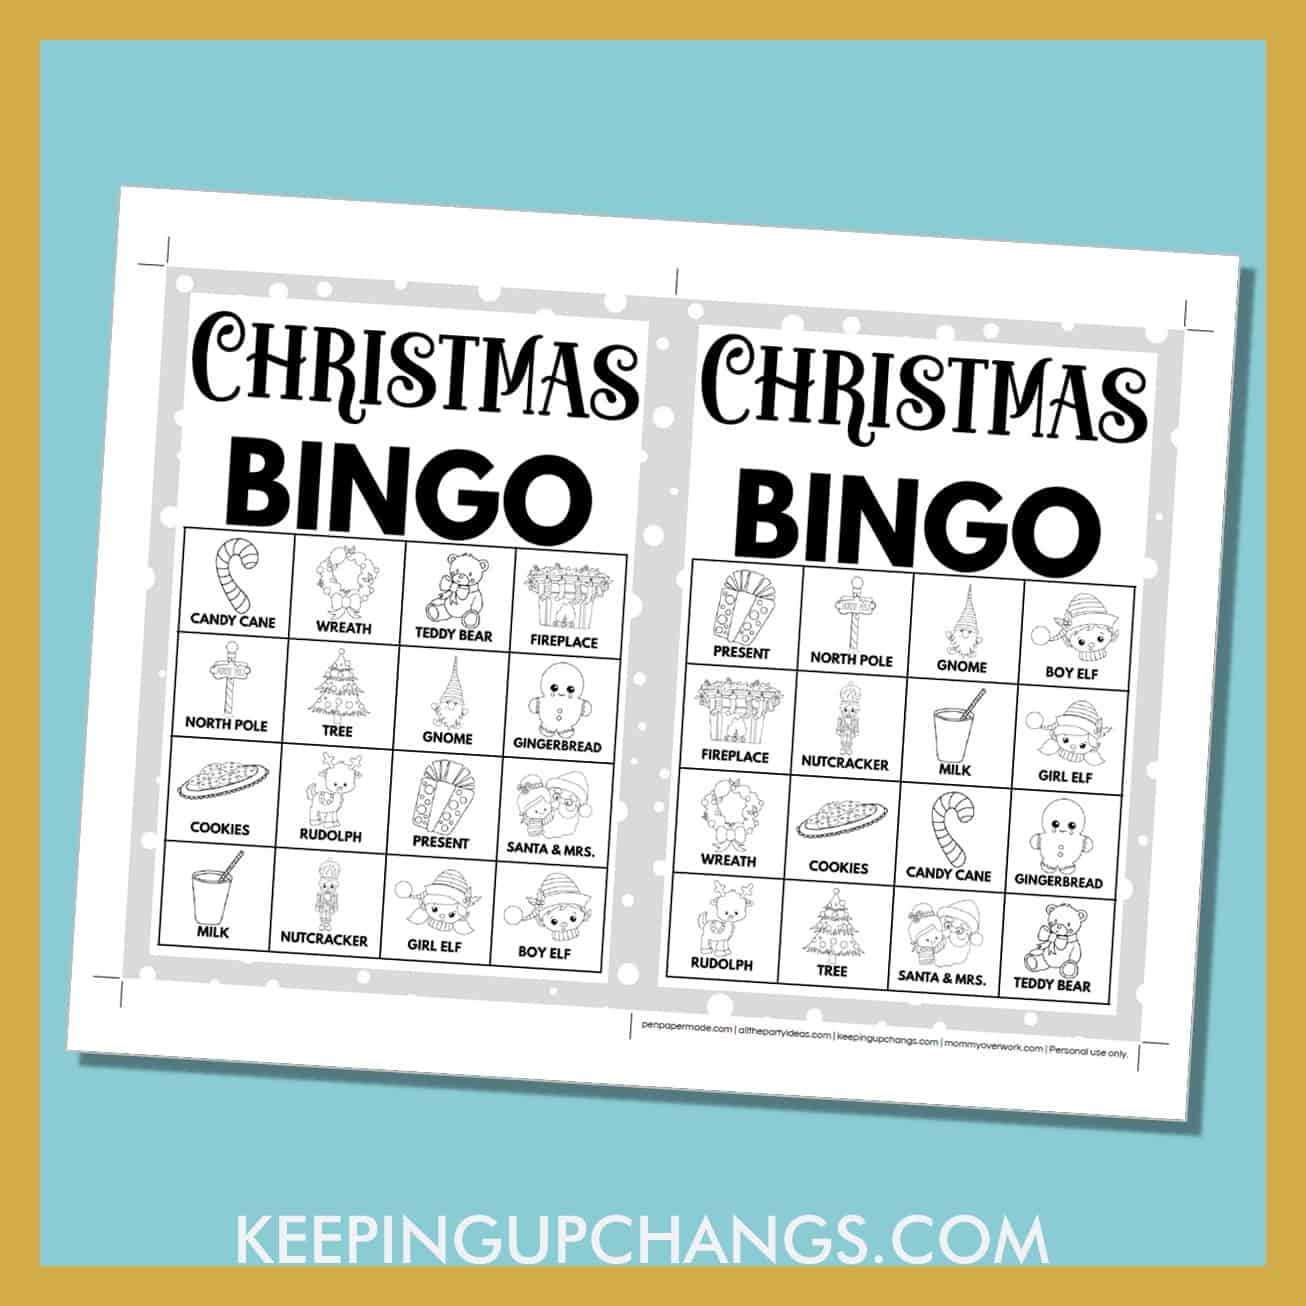 free christmas bingo card 4x4 5x7 black white coloring game boards with images and text words.